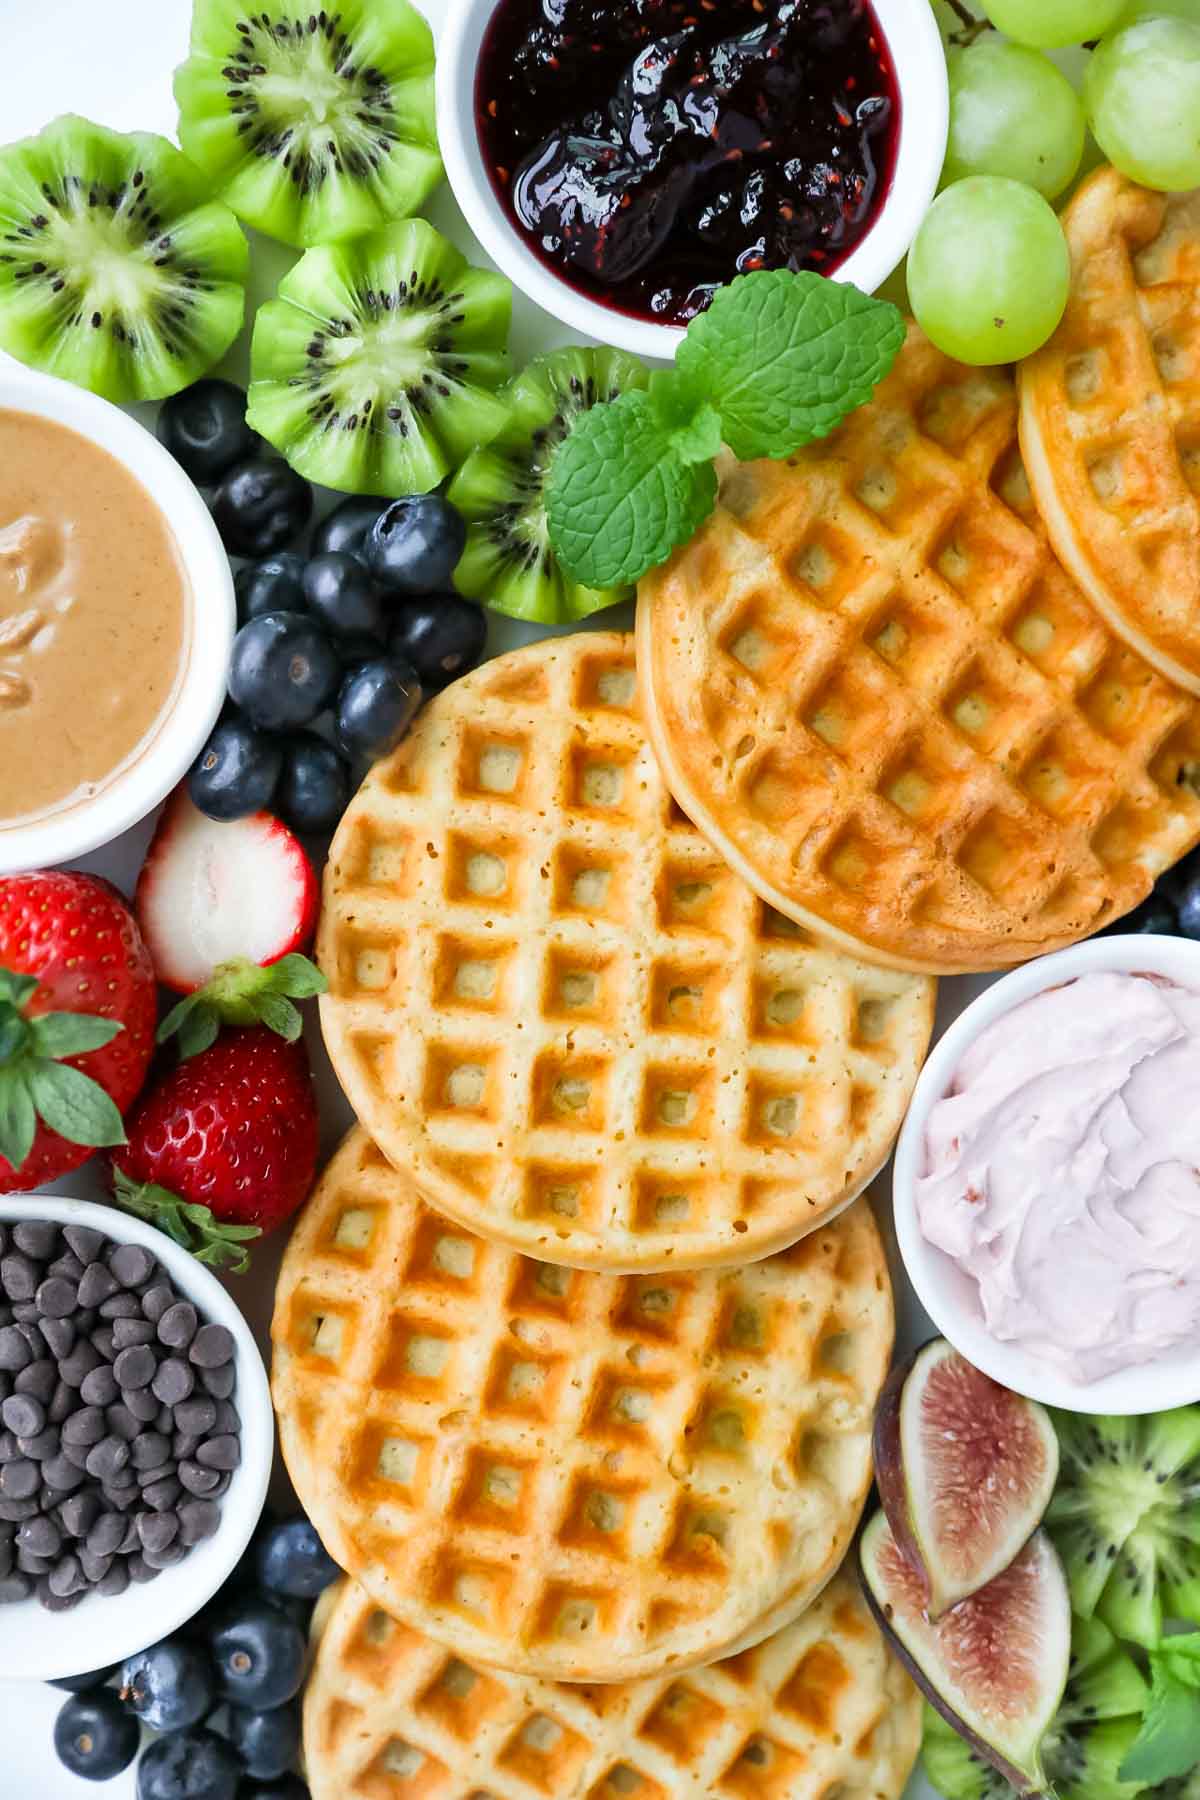 Waffles, grapes, kiwi, mint, figs, strawberries, blueberries, chocolate chips, cream cheese, peanut butter, and jelly.